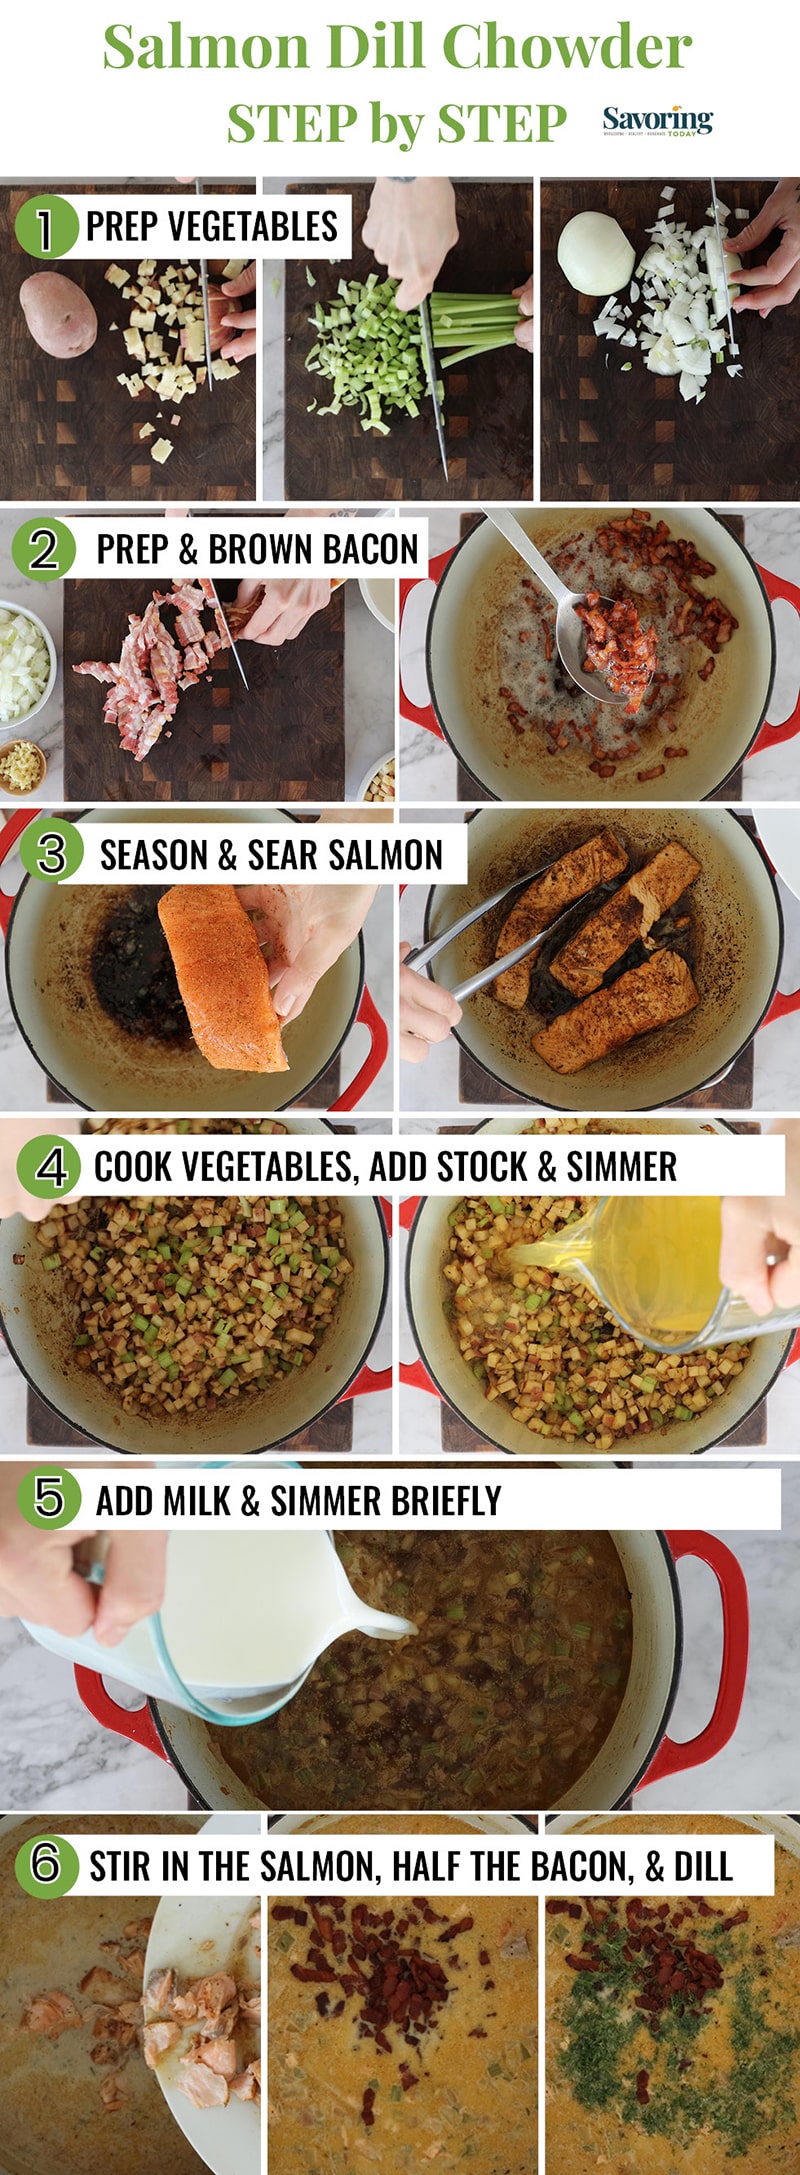 step by step collage of how to make salmon chowder
